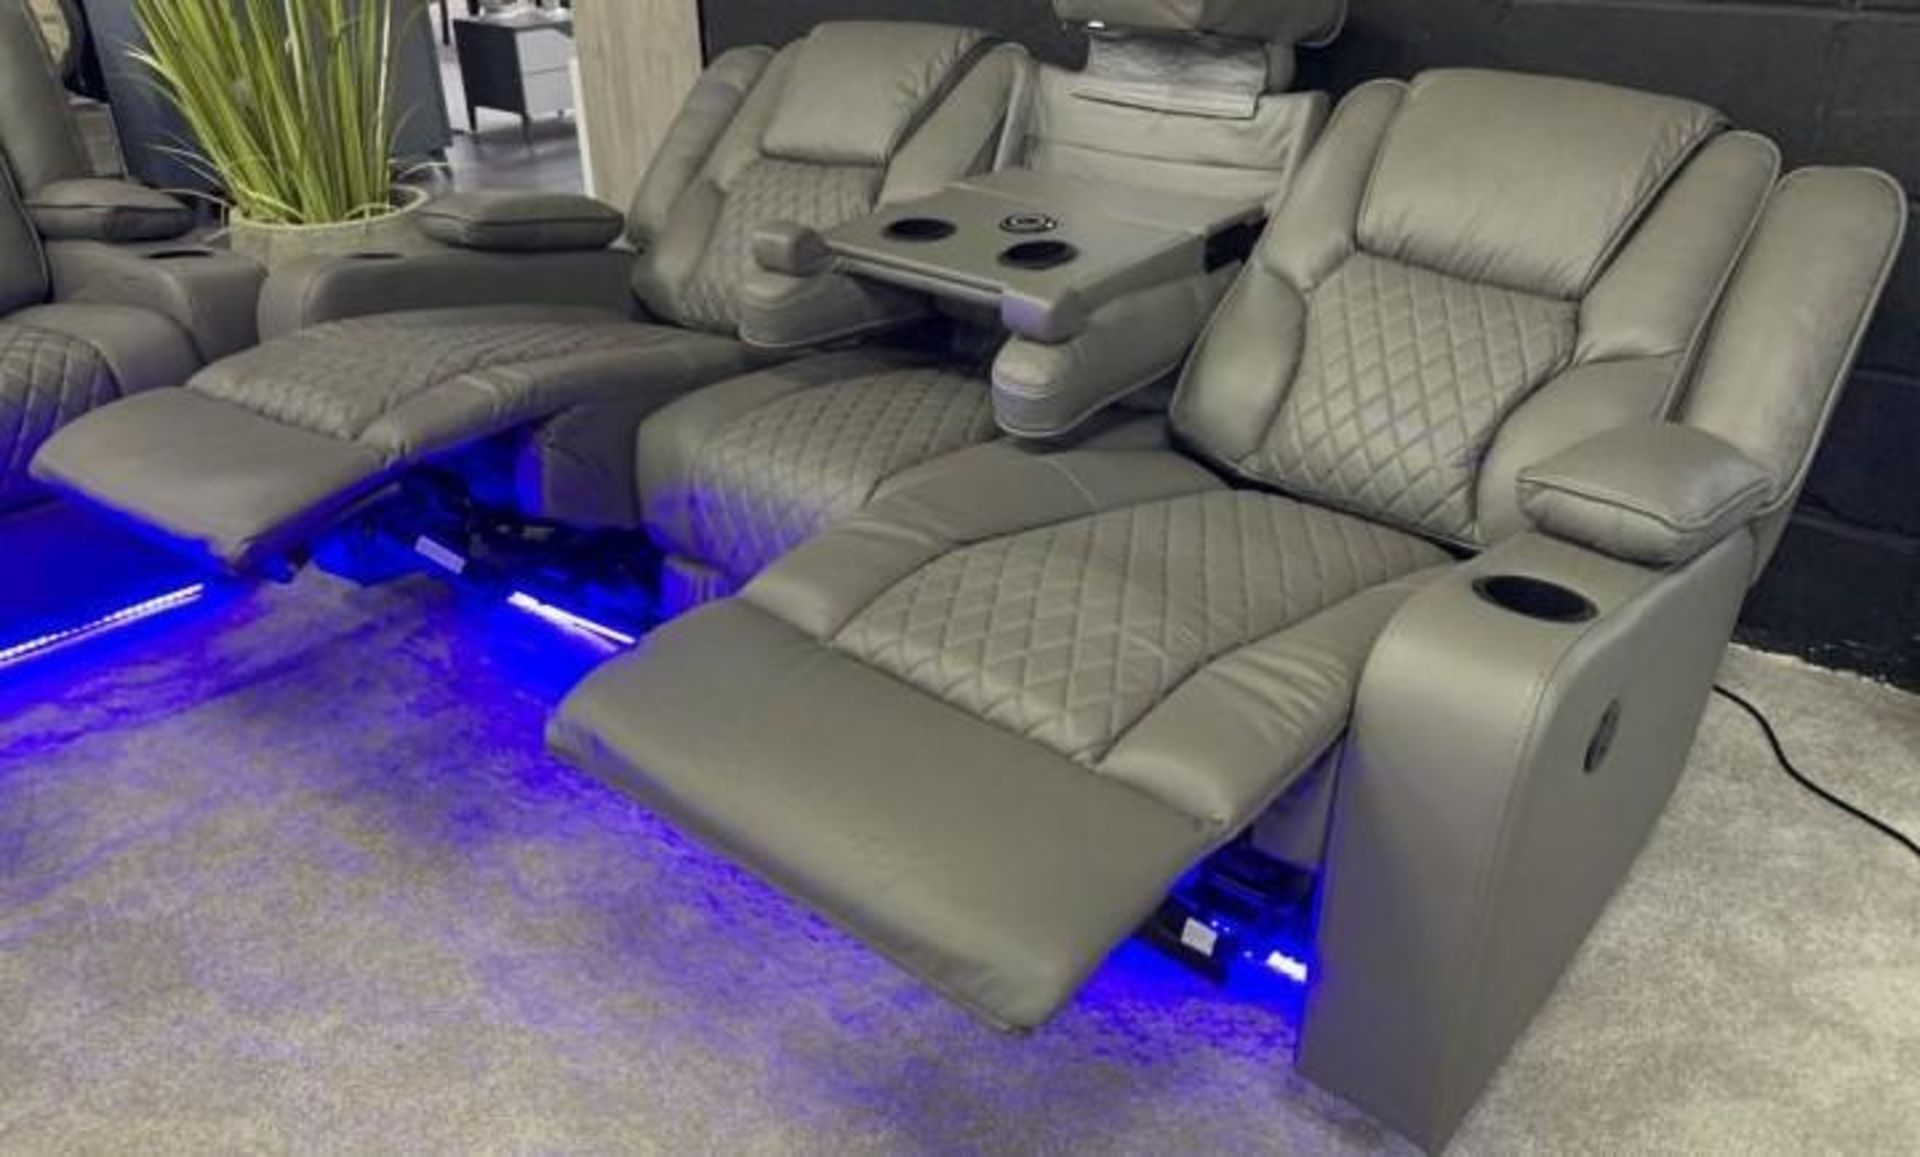 2 X NEW Bentley Grey Leather 3 Seater Electric Recliner With Wireless Charging and Floor lights!